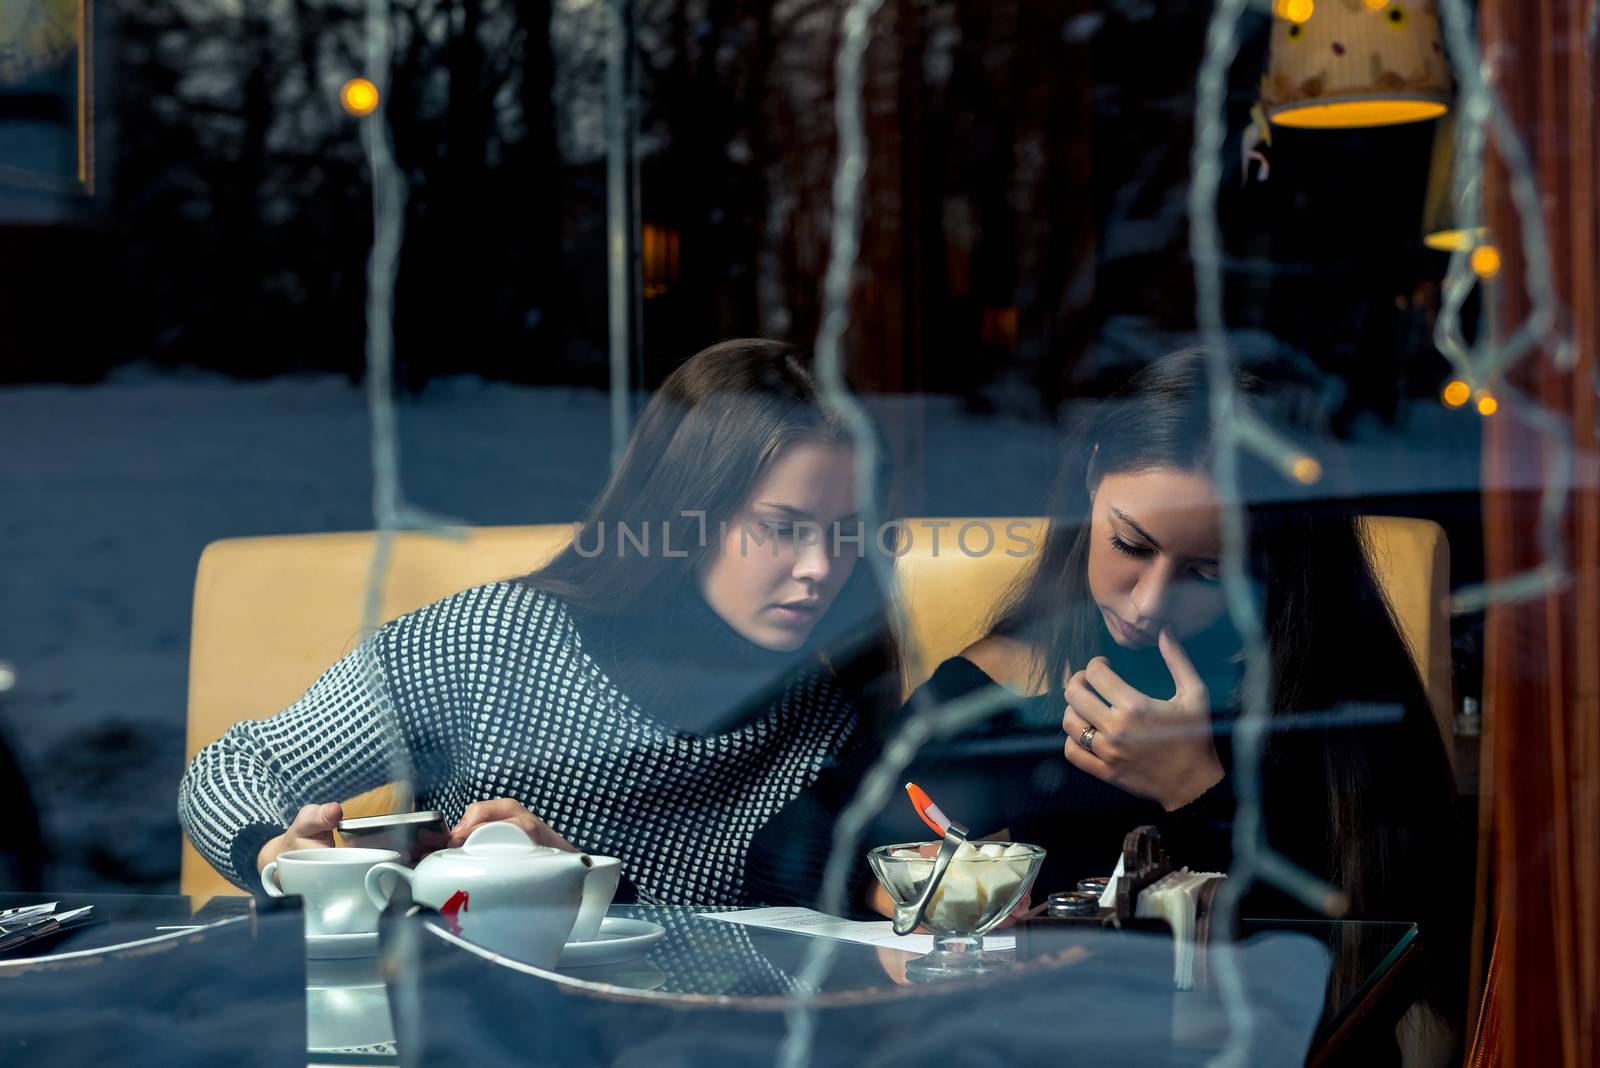 Communication of girlfriends, a meeting in a cafe, shooting behi by kosmsos111